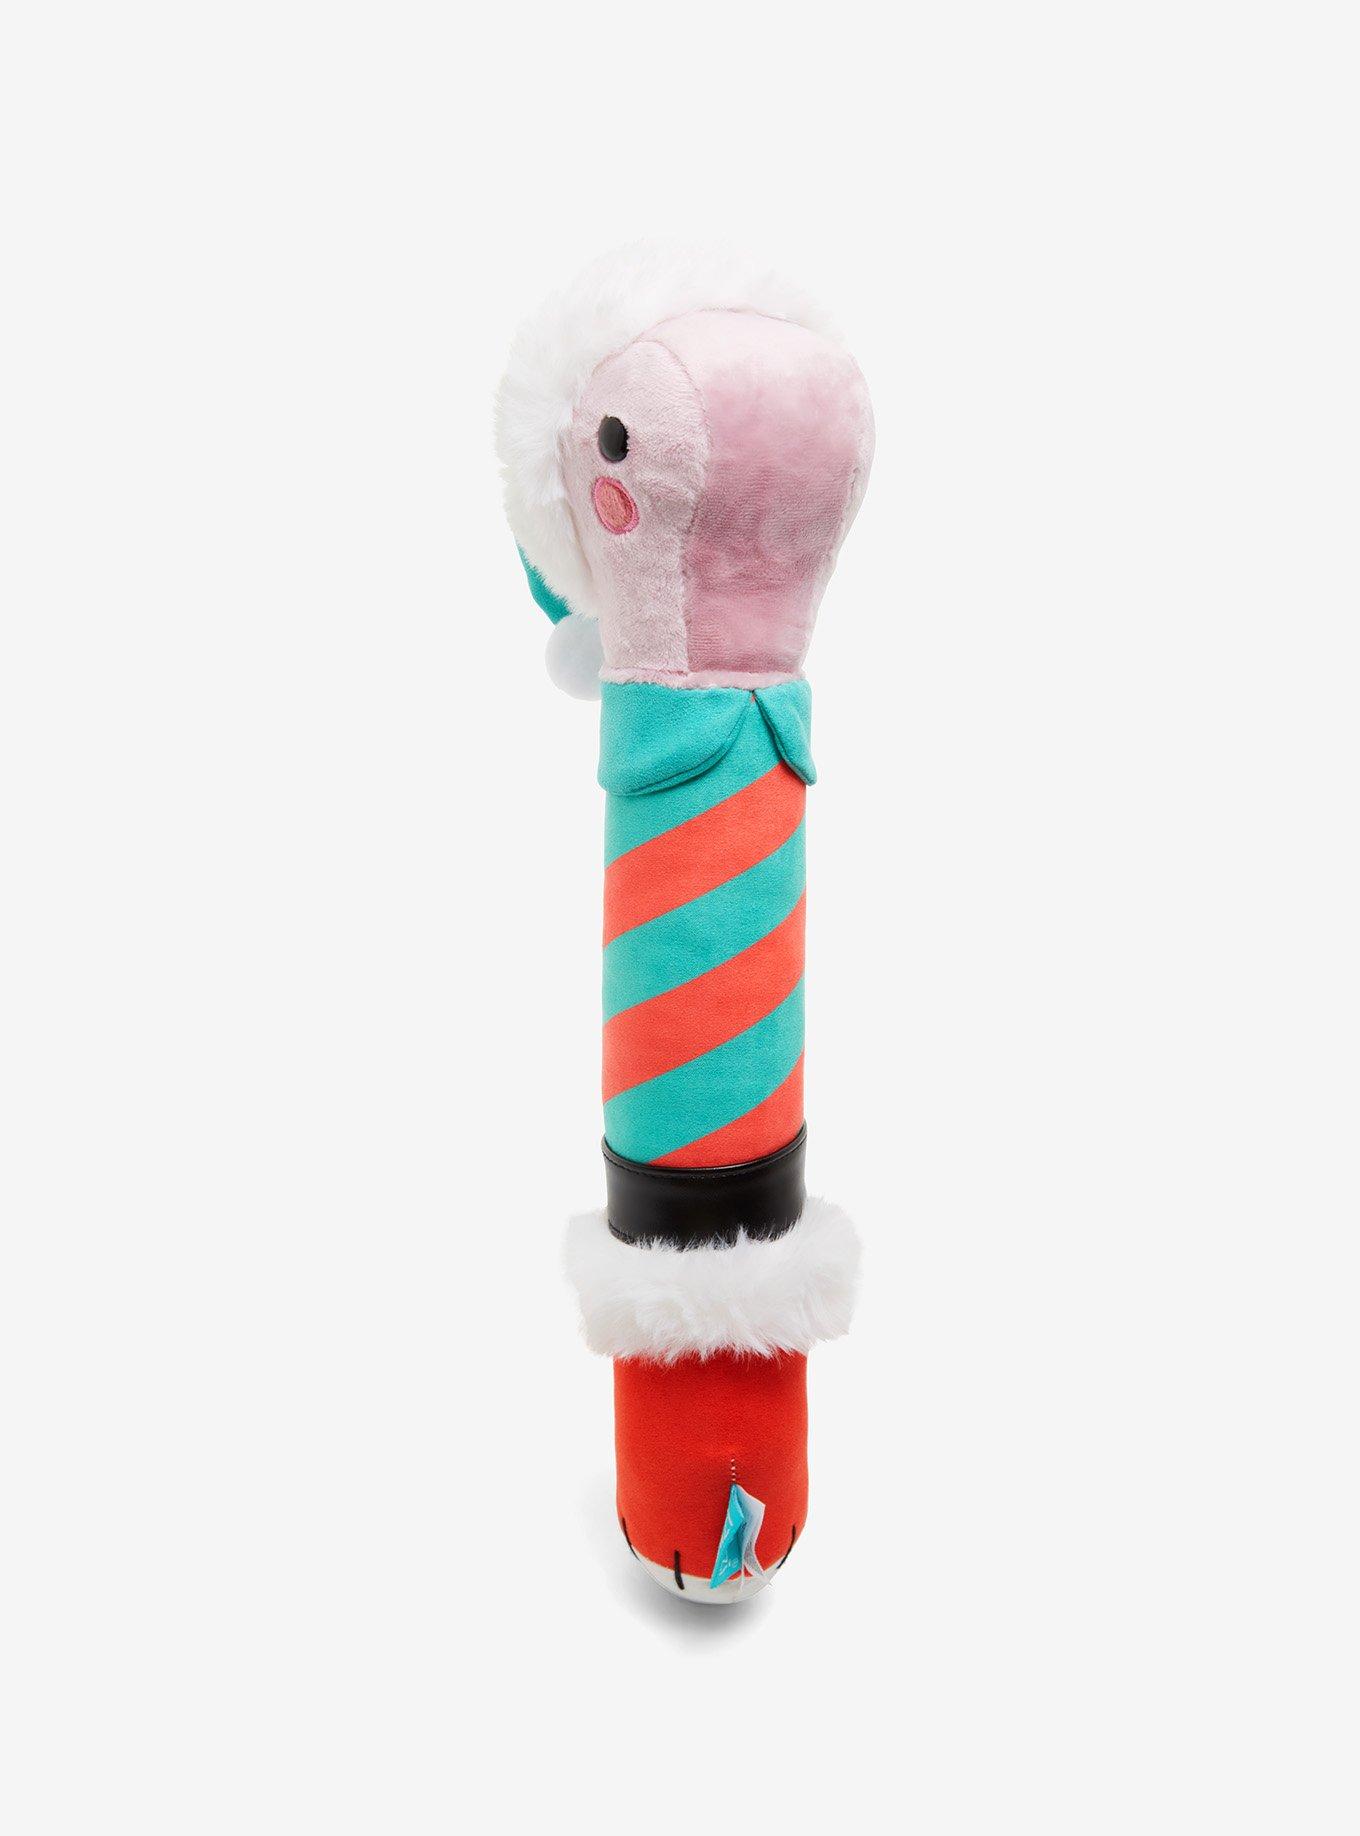 Bellzi Wormi the Worm with Elf Outfit 14 Inch Plush